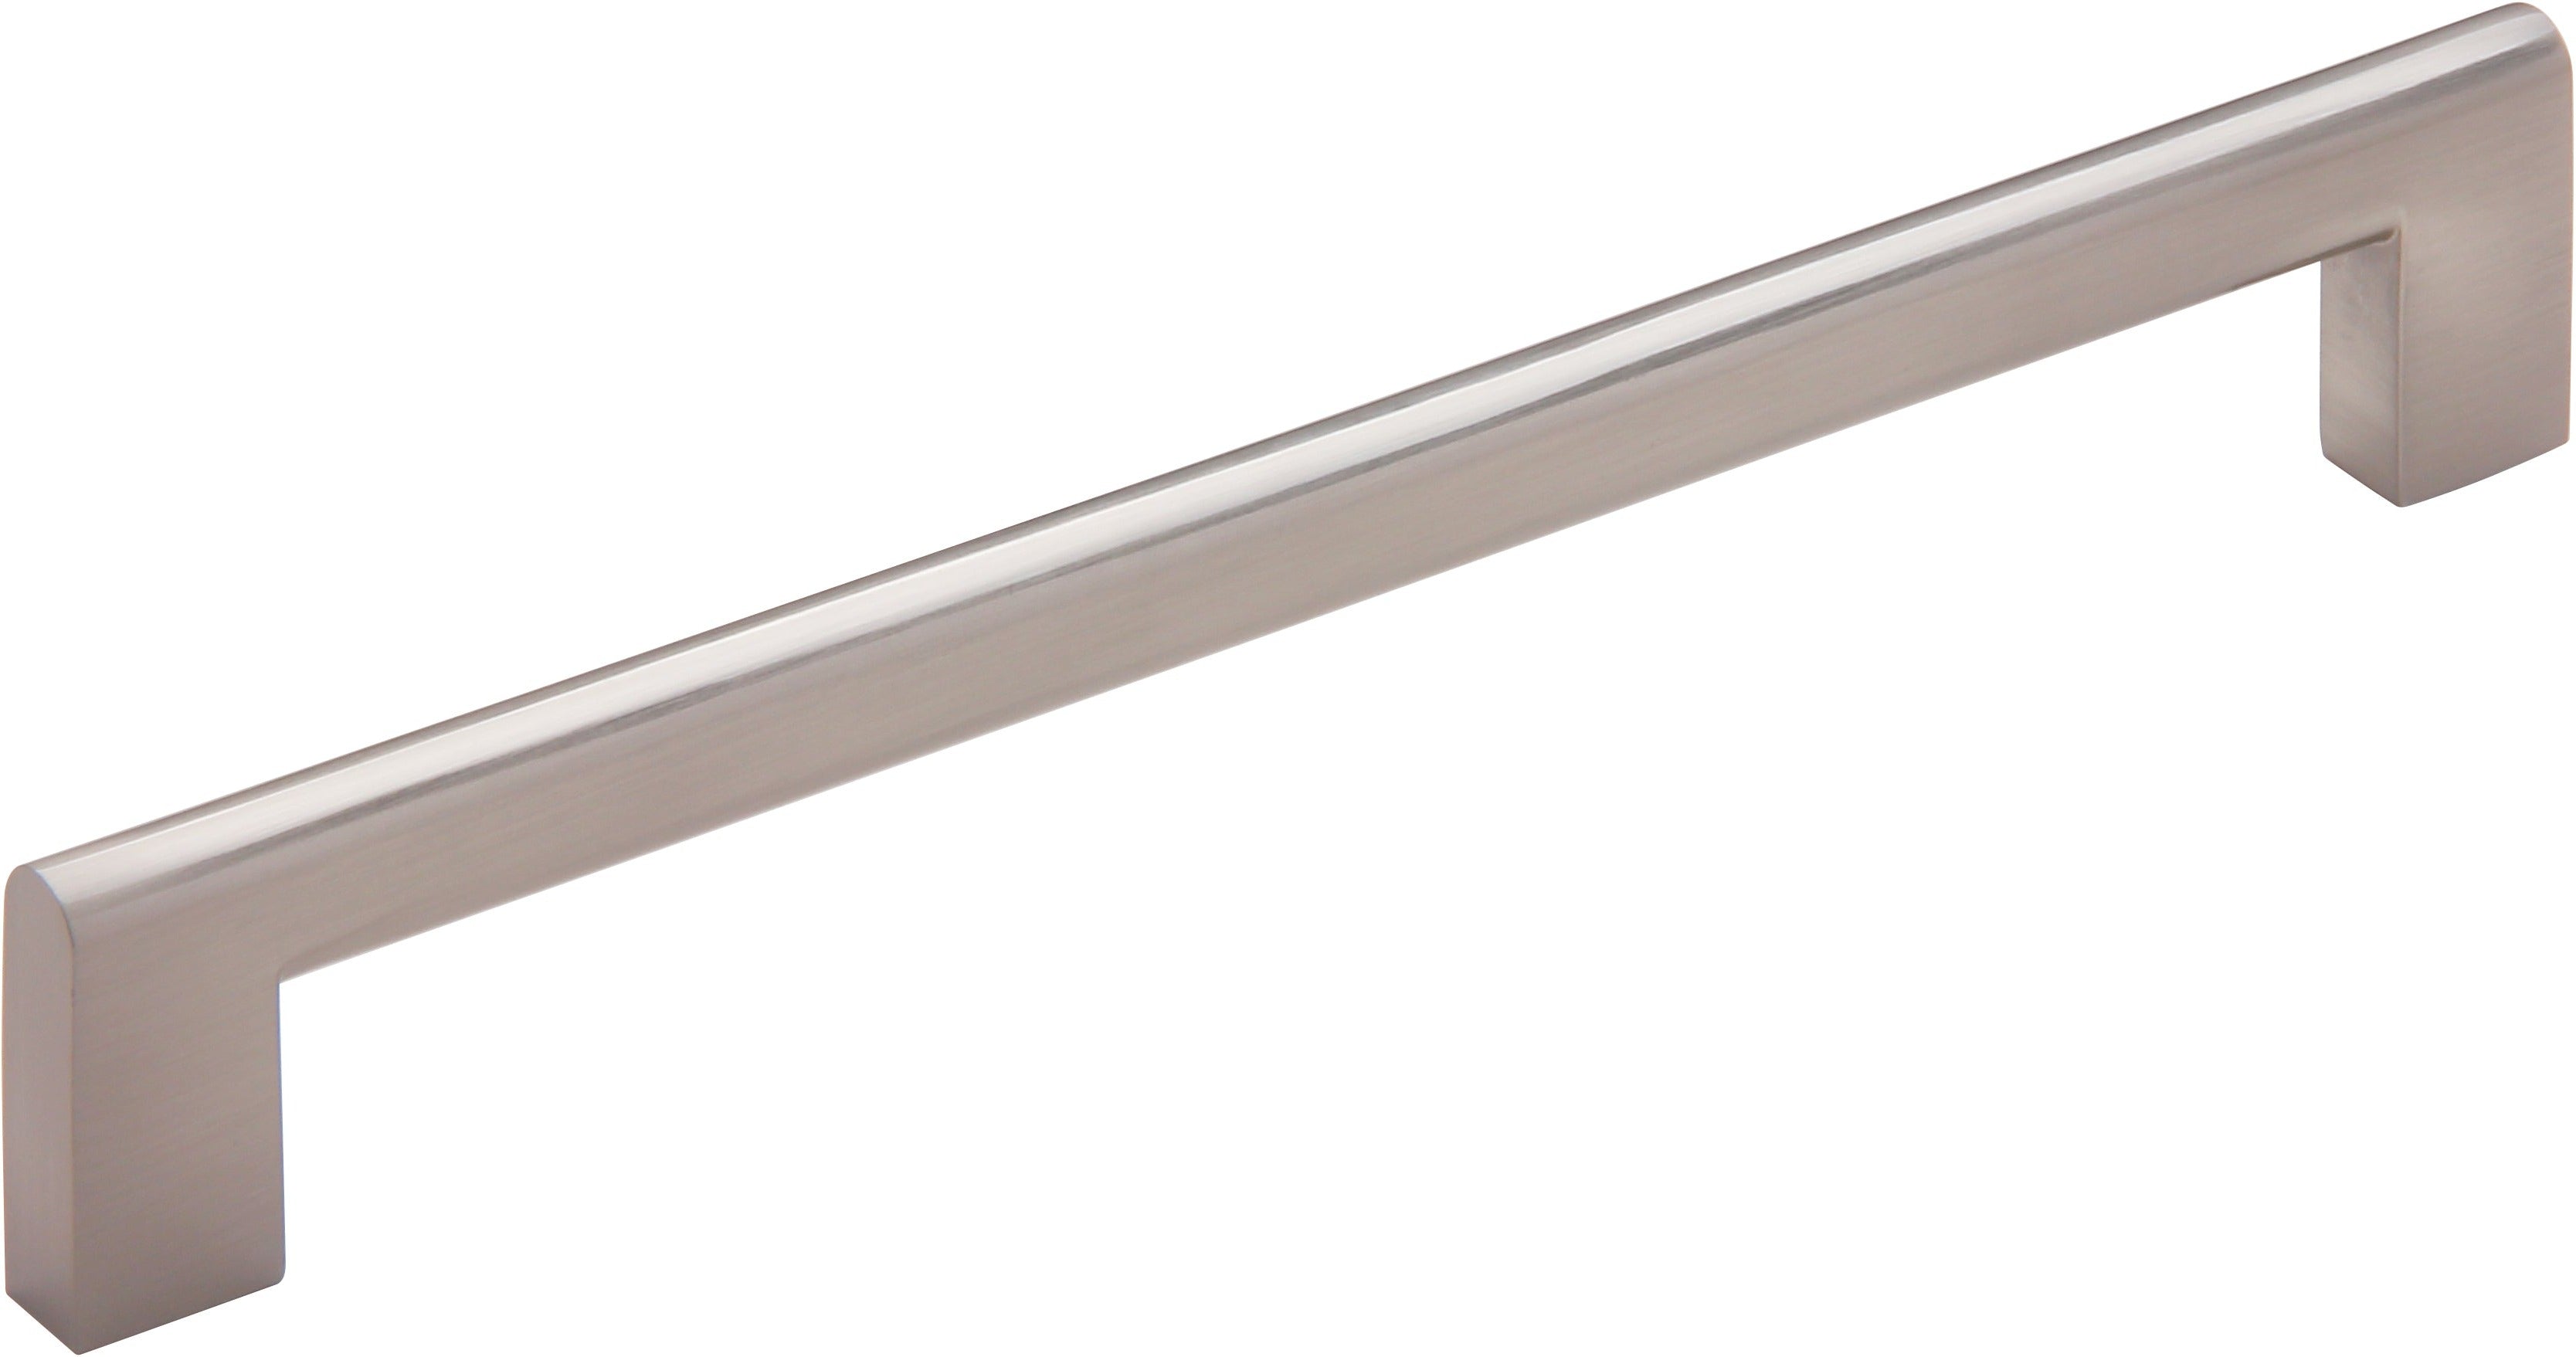 Silverline A2160 - 8-3/11 inch (210mm) Aluminum Square Bar Pull in Brushed Satin Nickel FinishCC: 7-11/20 inch (192mm)